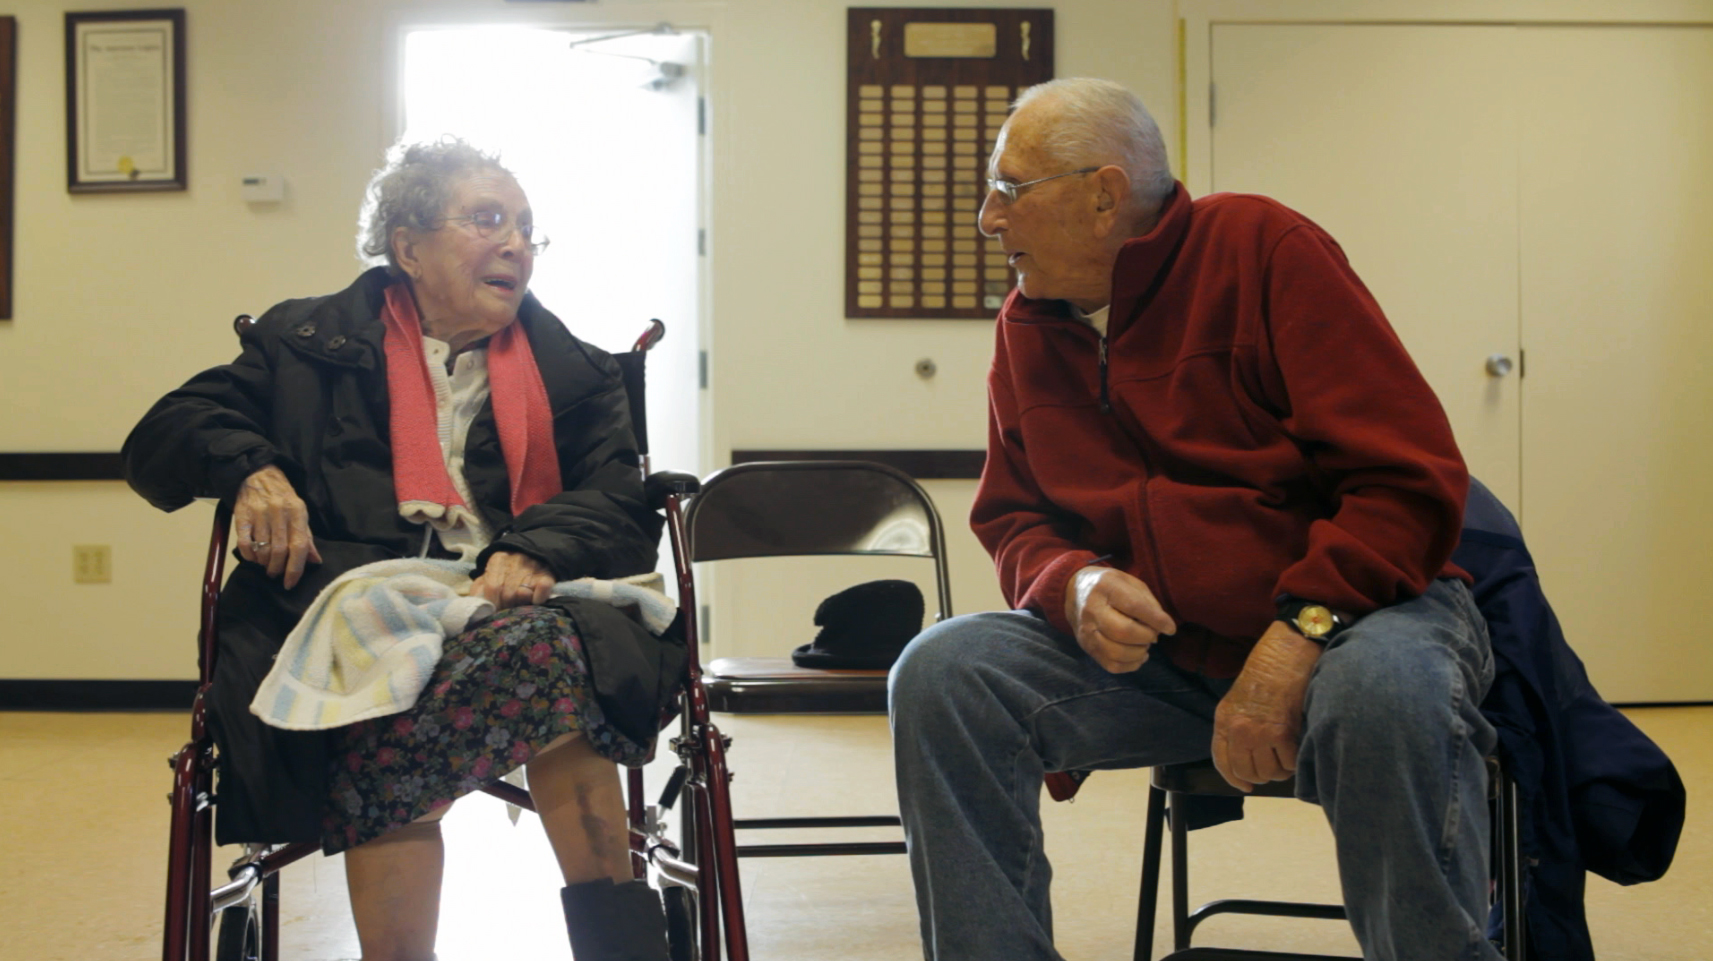 Vermont natives Hazel Devino (age 101) and George Smith (age 88) make up part of the unlikely Dreamers cast.